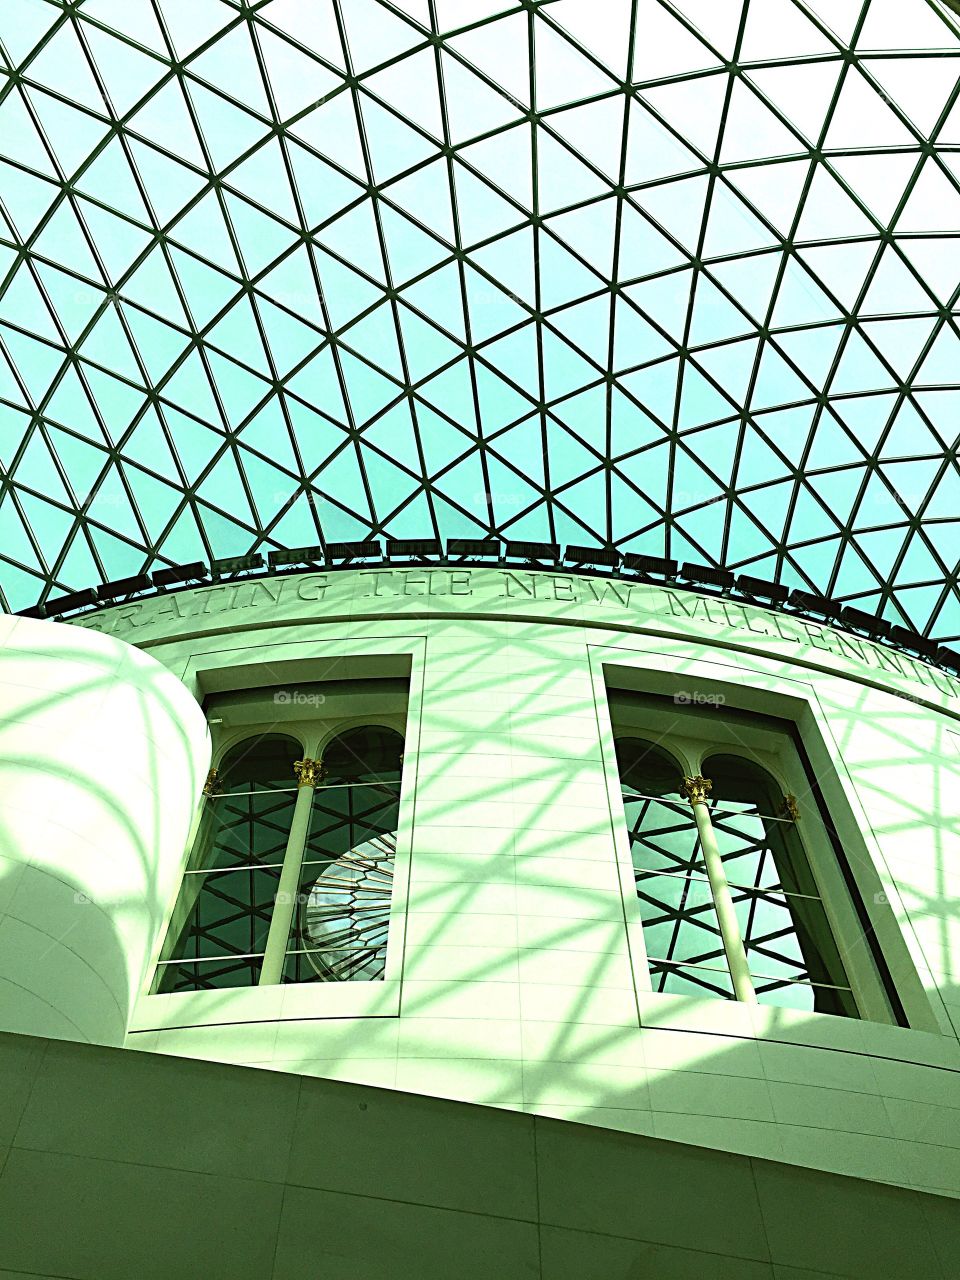 Amazing roof at the British Museum in London!